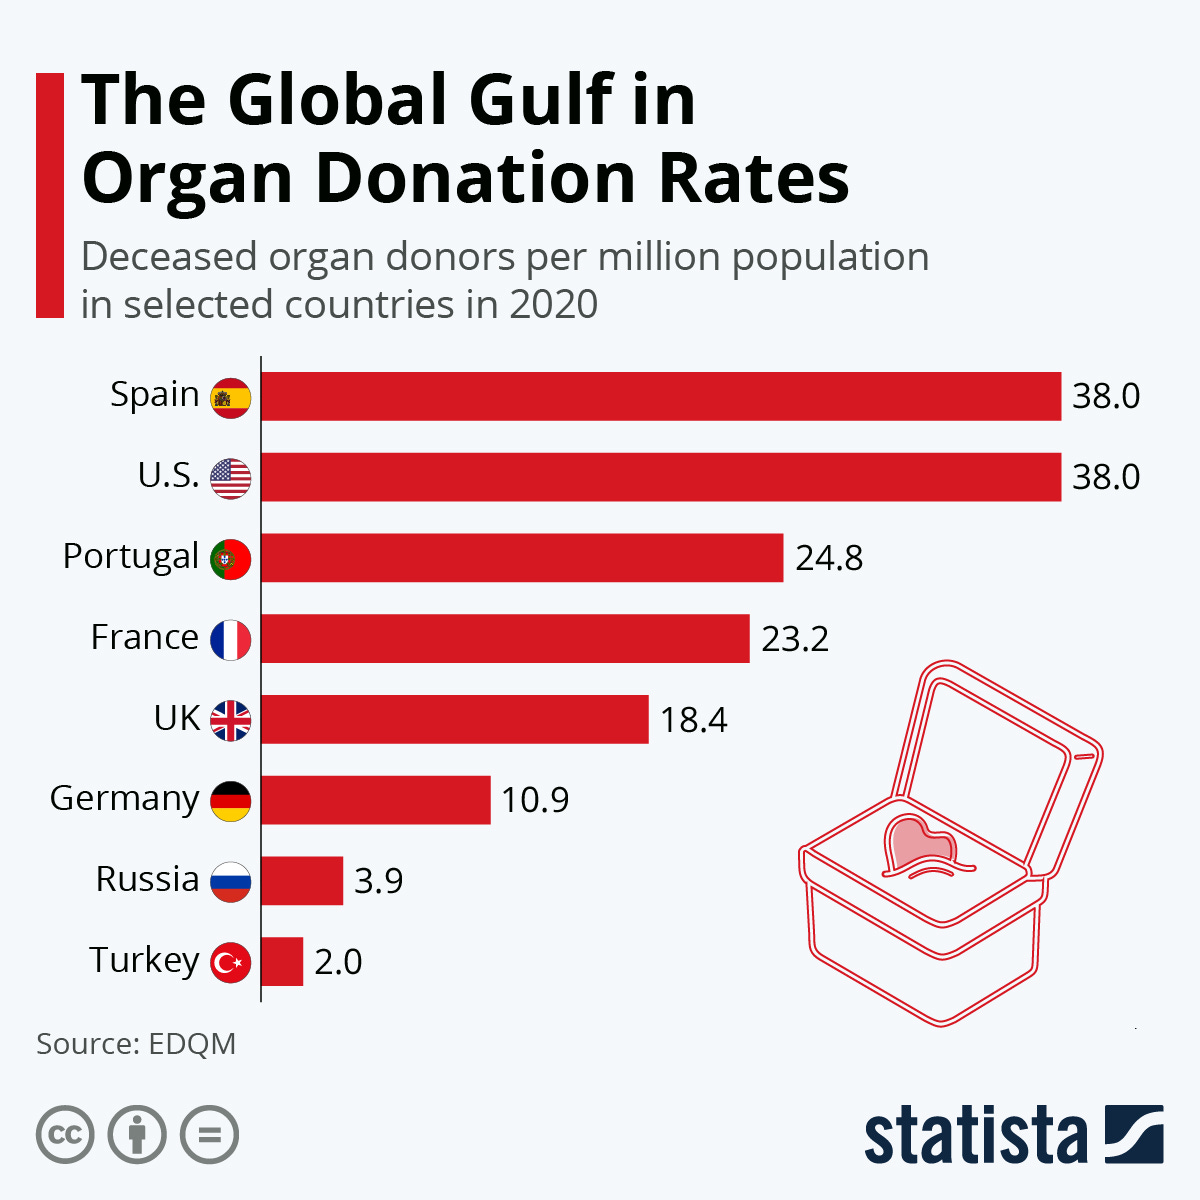 Bar chart showing deceased organ donors per million population in selected countries in 2020: Spain, 38.0; US, 38.0; Portugal 24.8; France, 23.2; UK 18.4; Germany, 10.9; Russia 3.9; Turkey, 2,0. Source: EDQM.